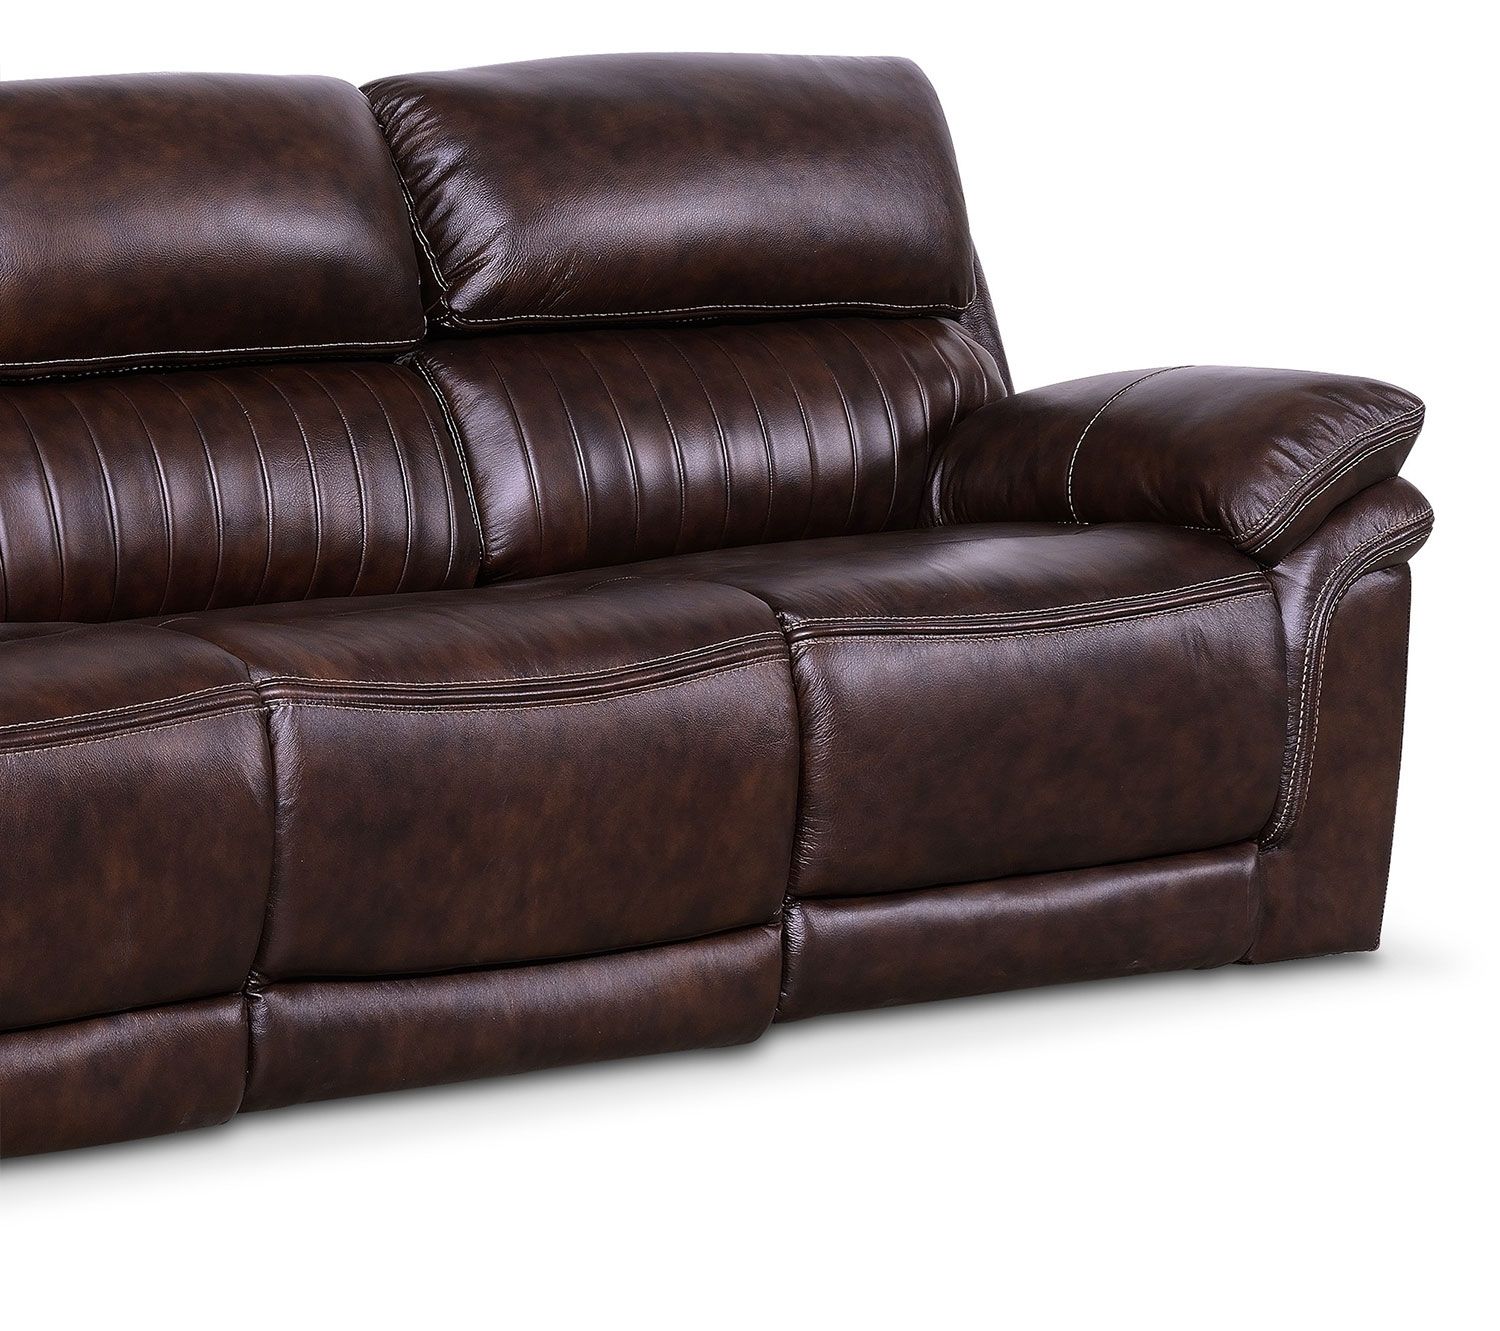 Monterey 3 Piece Power Reclining Sofa – Chocolate | Value City For Recliner Sofas (Photo 6 of 10)